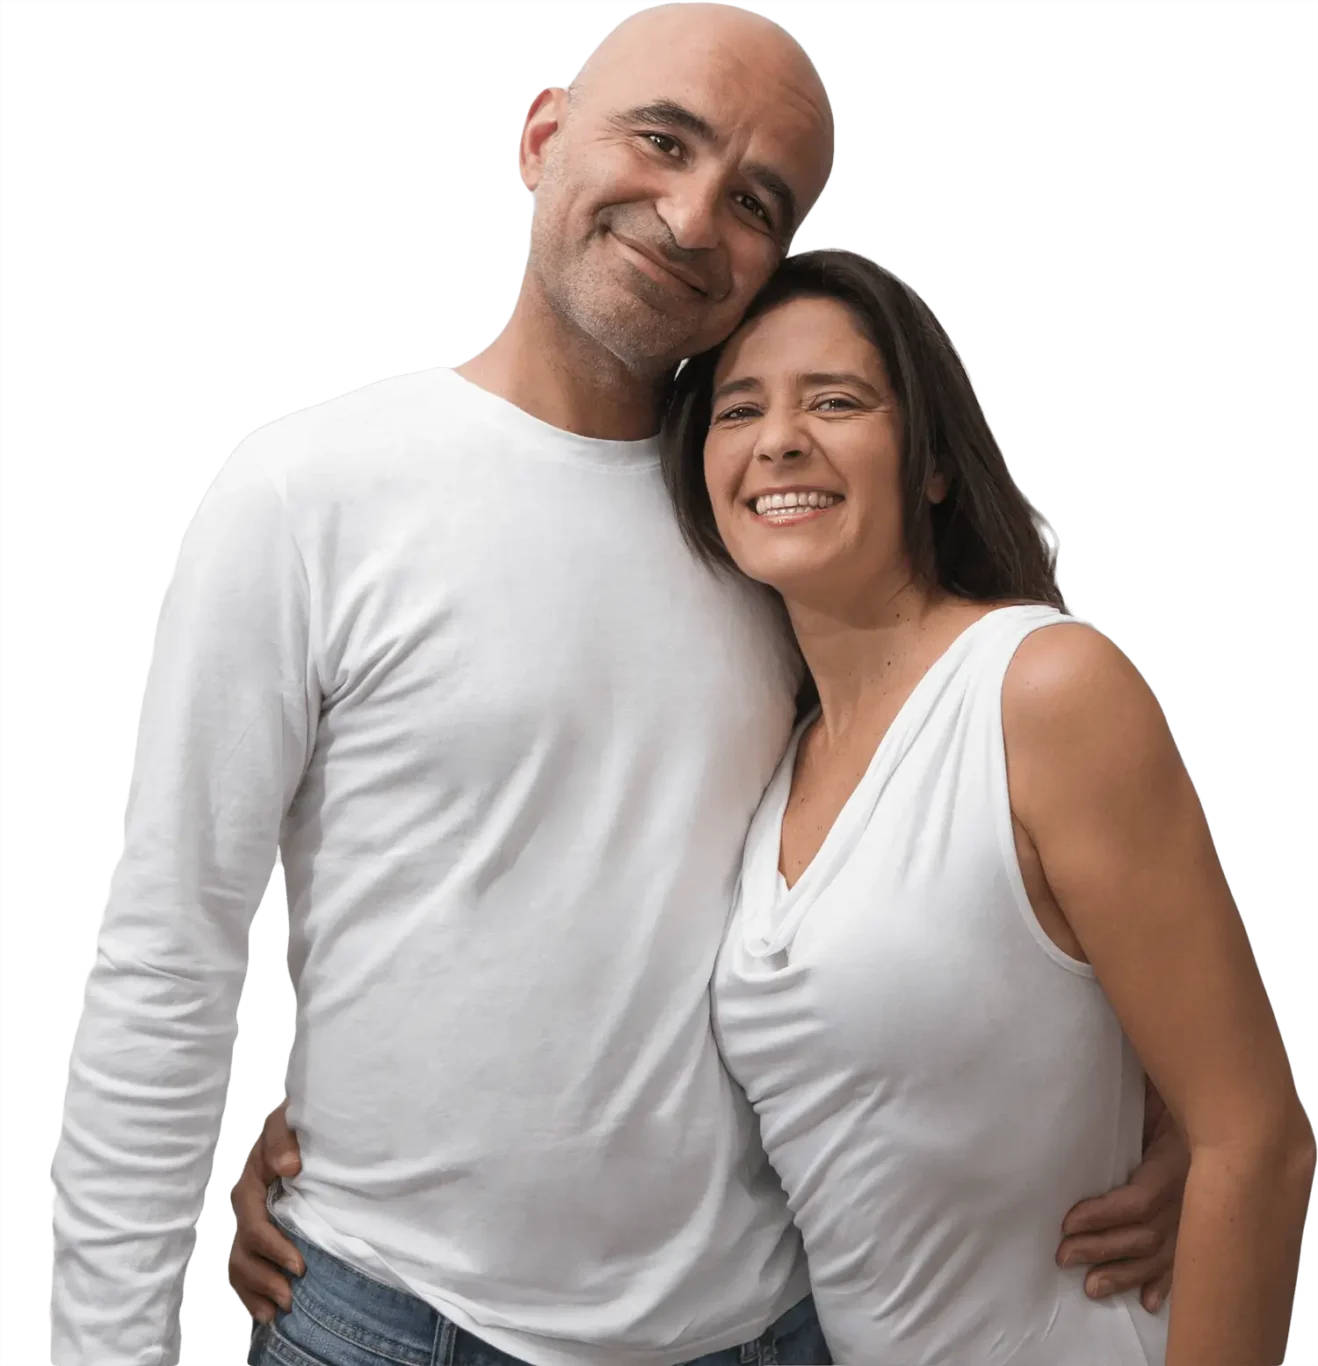 Attractive middle-aged Spanish couple showing love and happiness hugging.